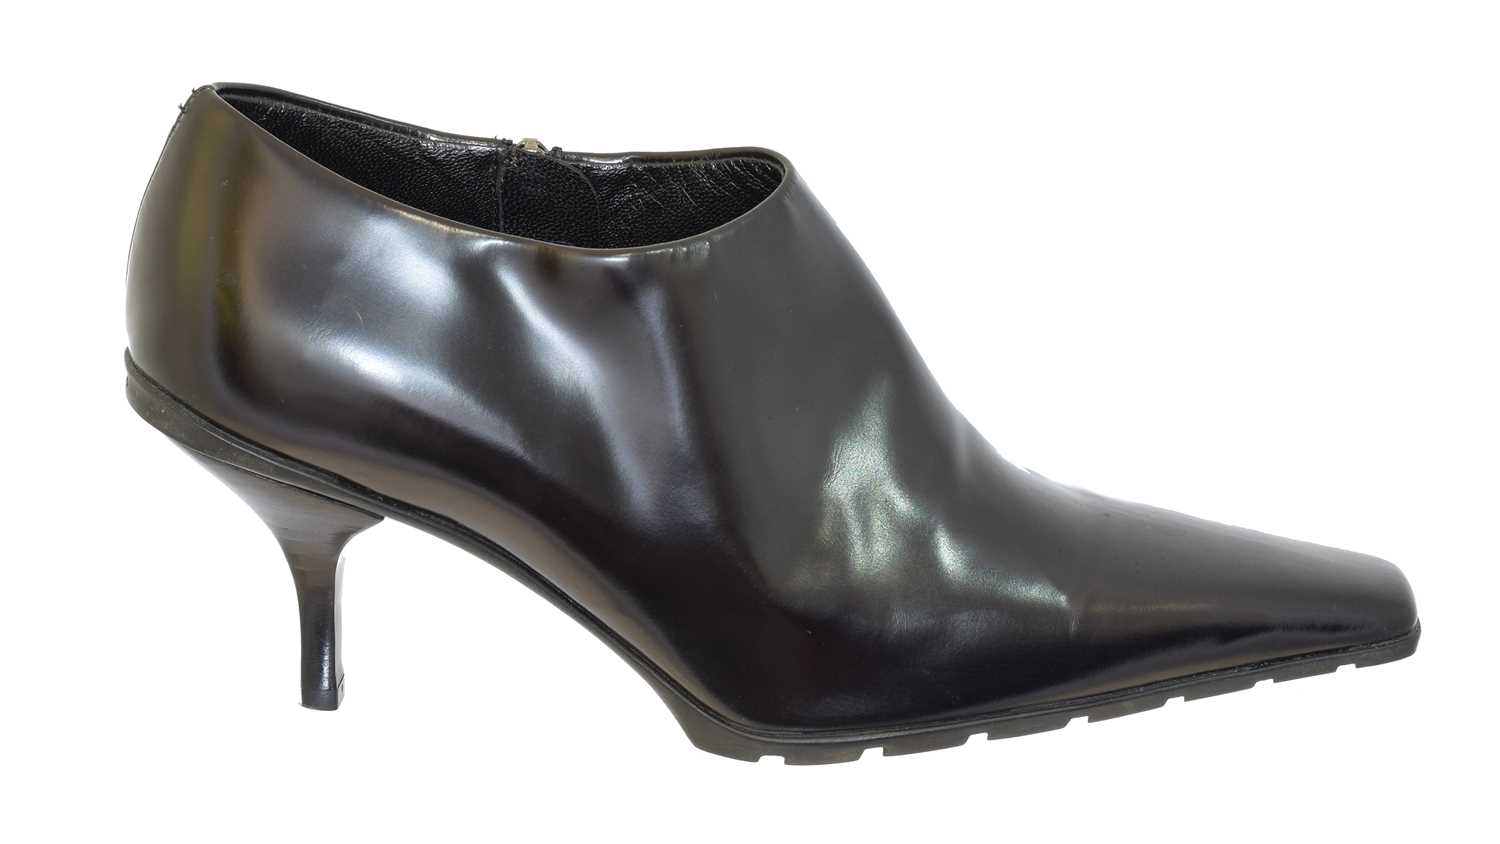 Lot 28 - A pair of heeled ankle boots by Prada